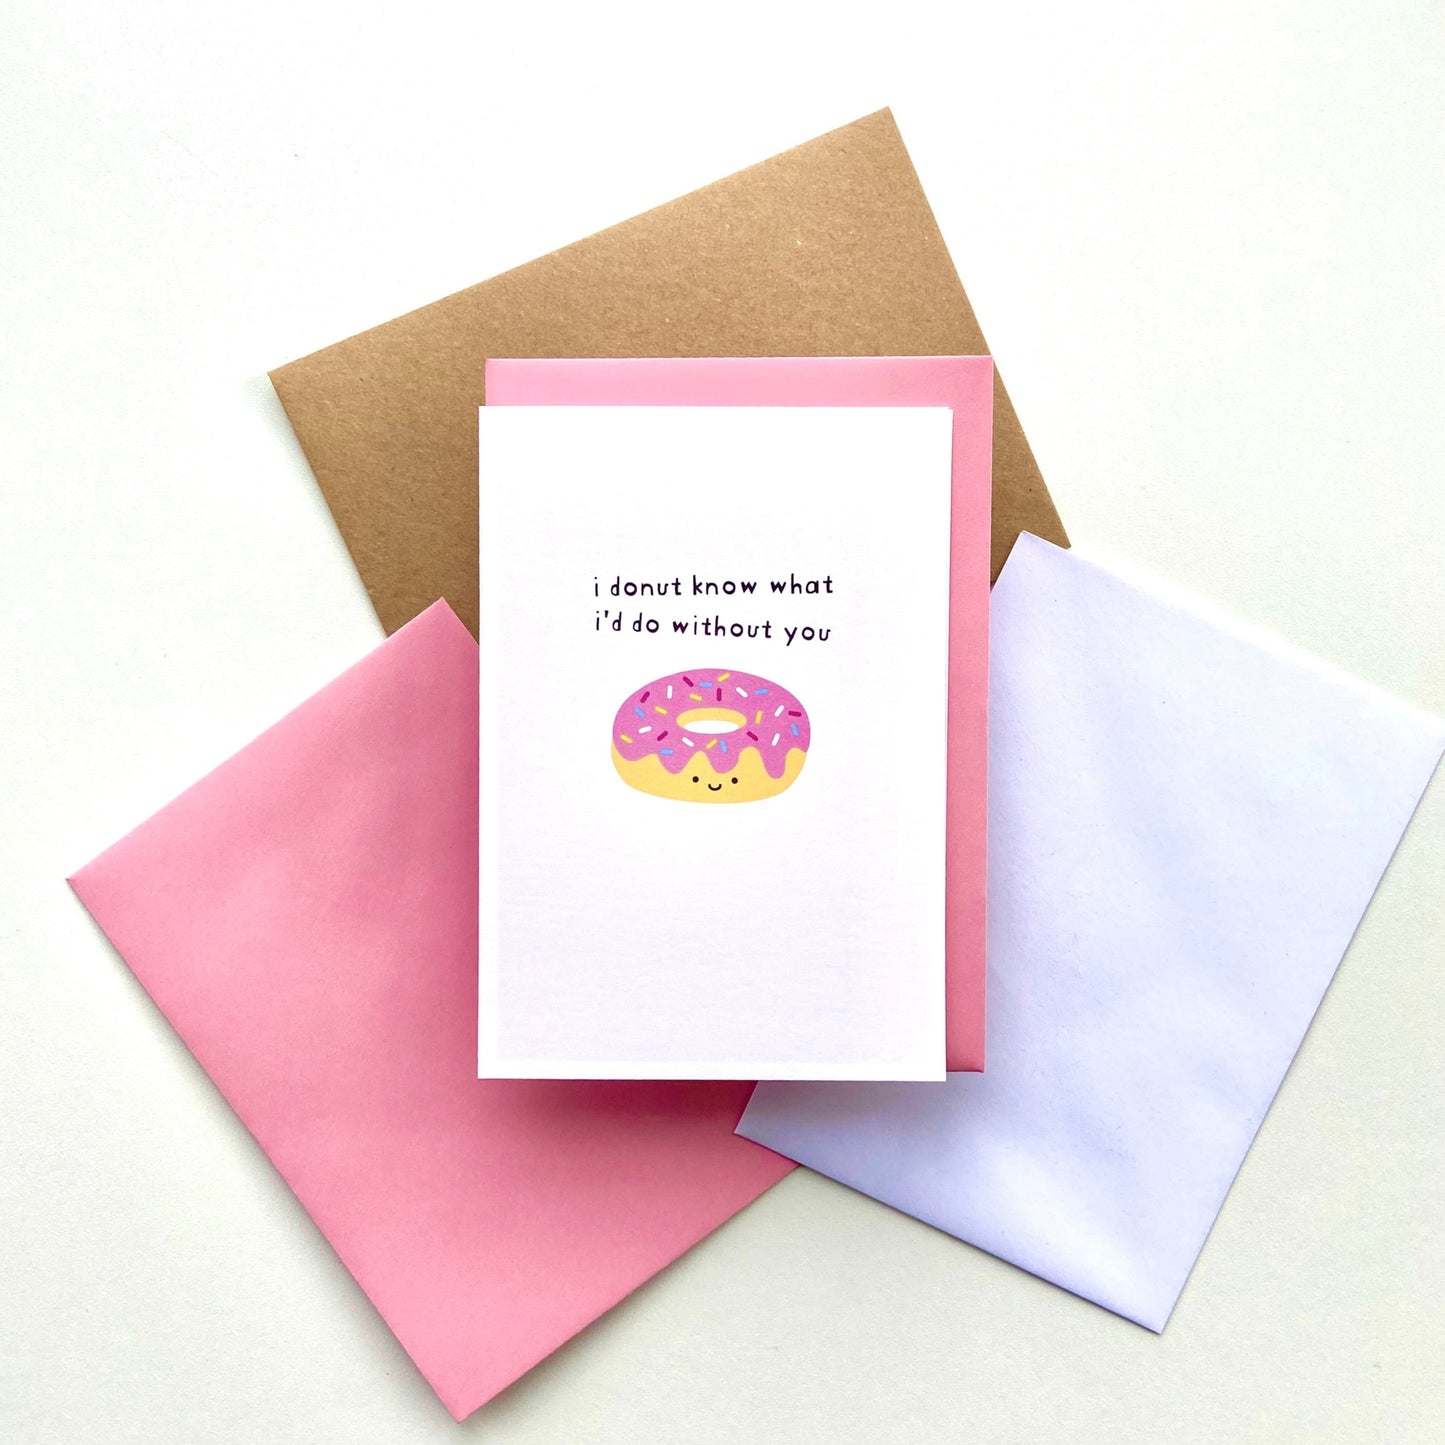 I Donut Know What I'd Do Without You Card